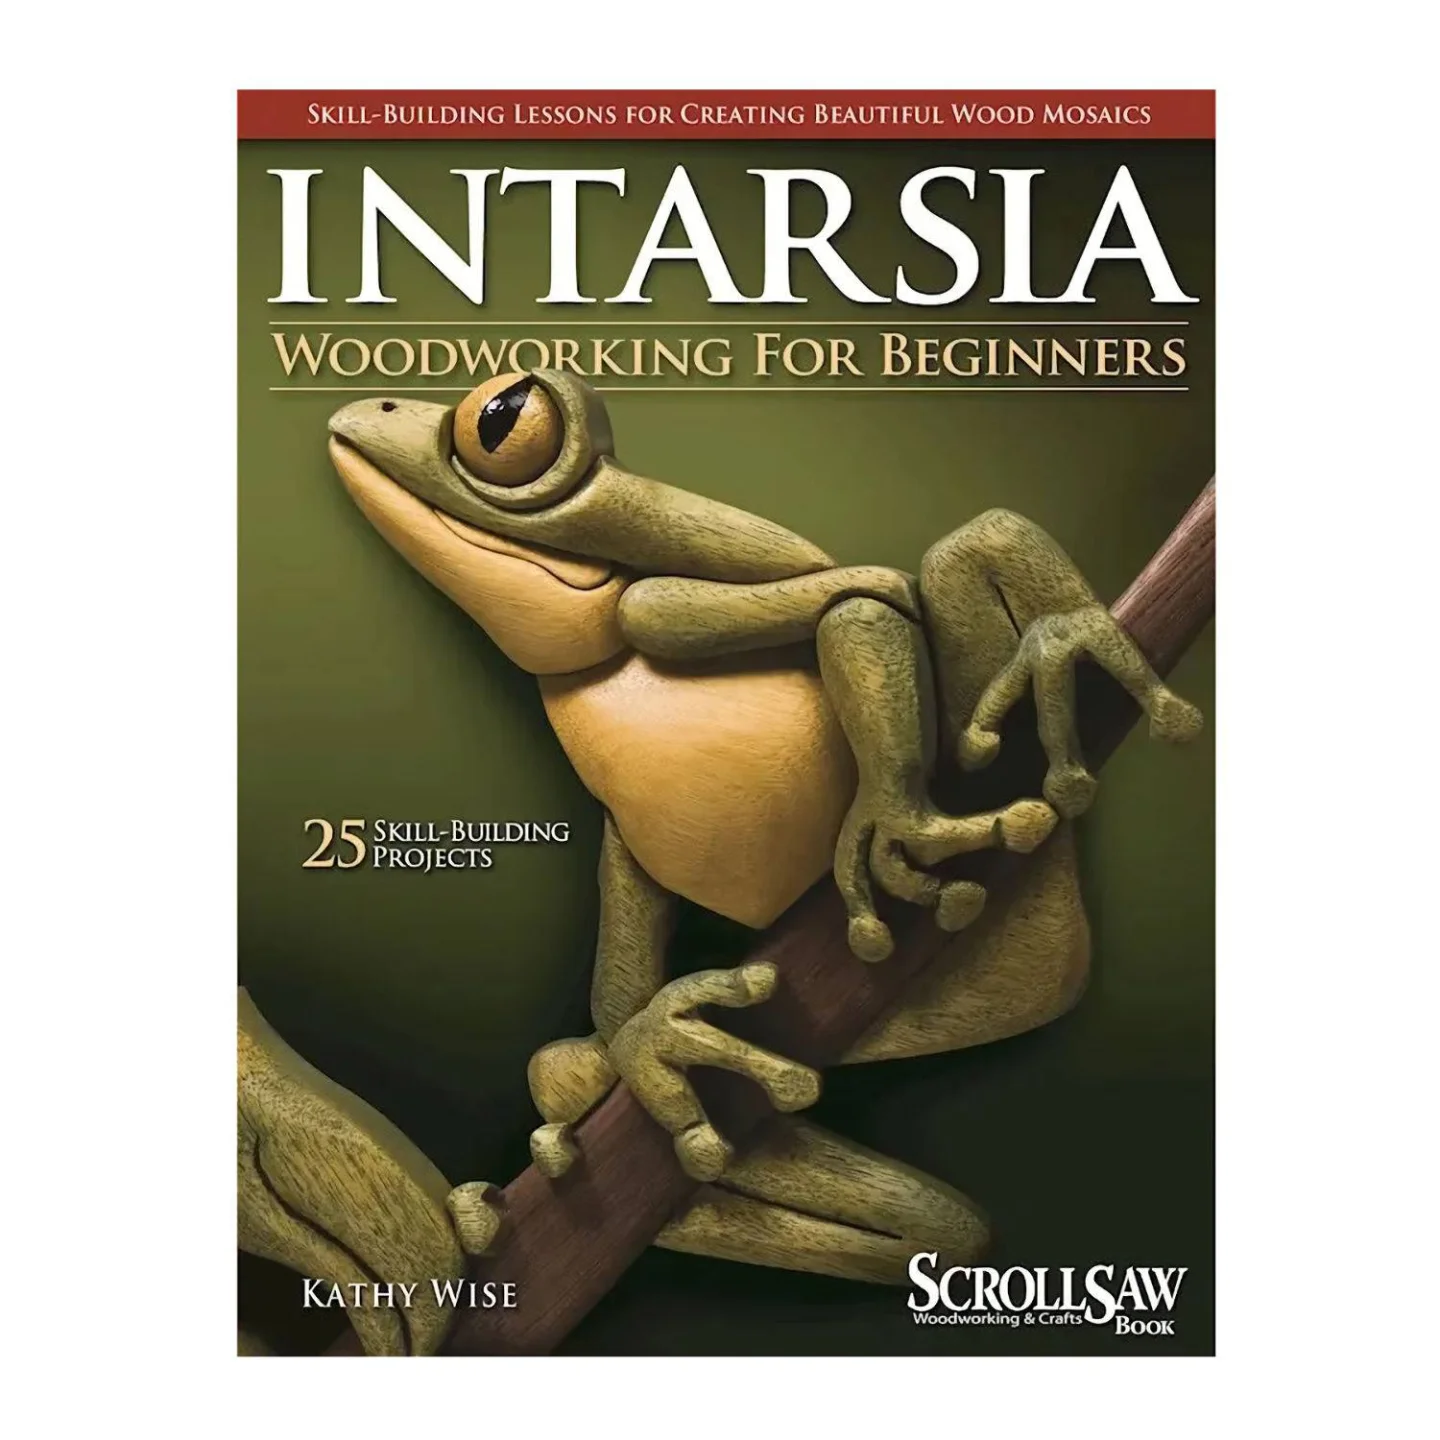 Intarsia-Woodworking-for-Beginners.